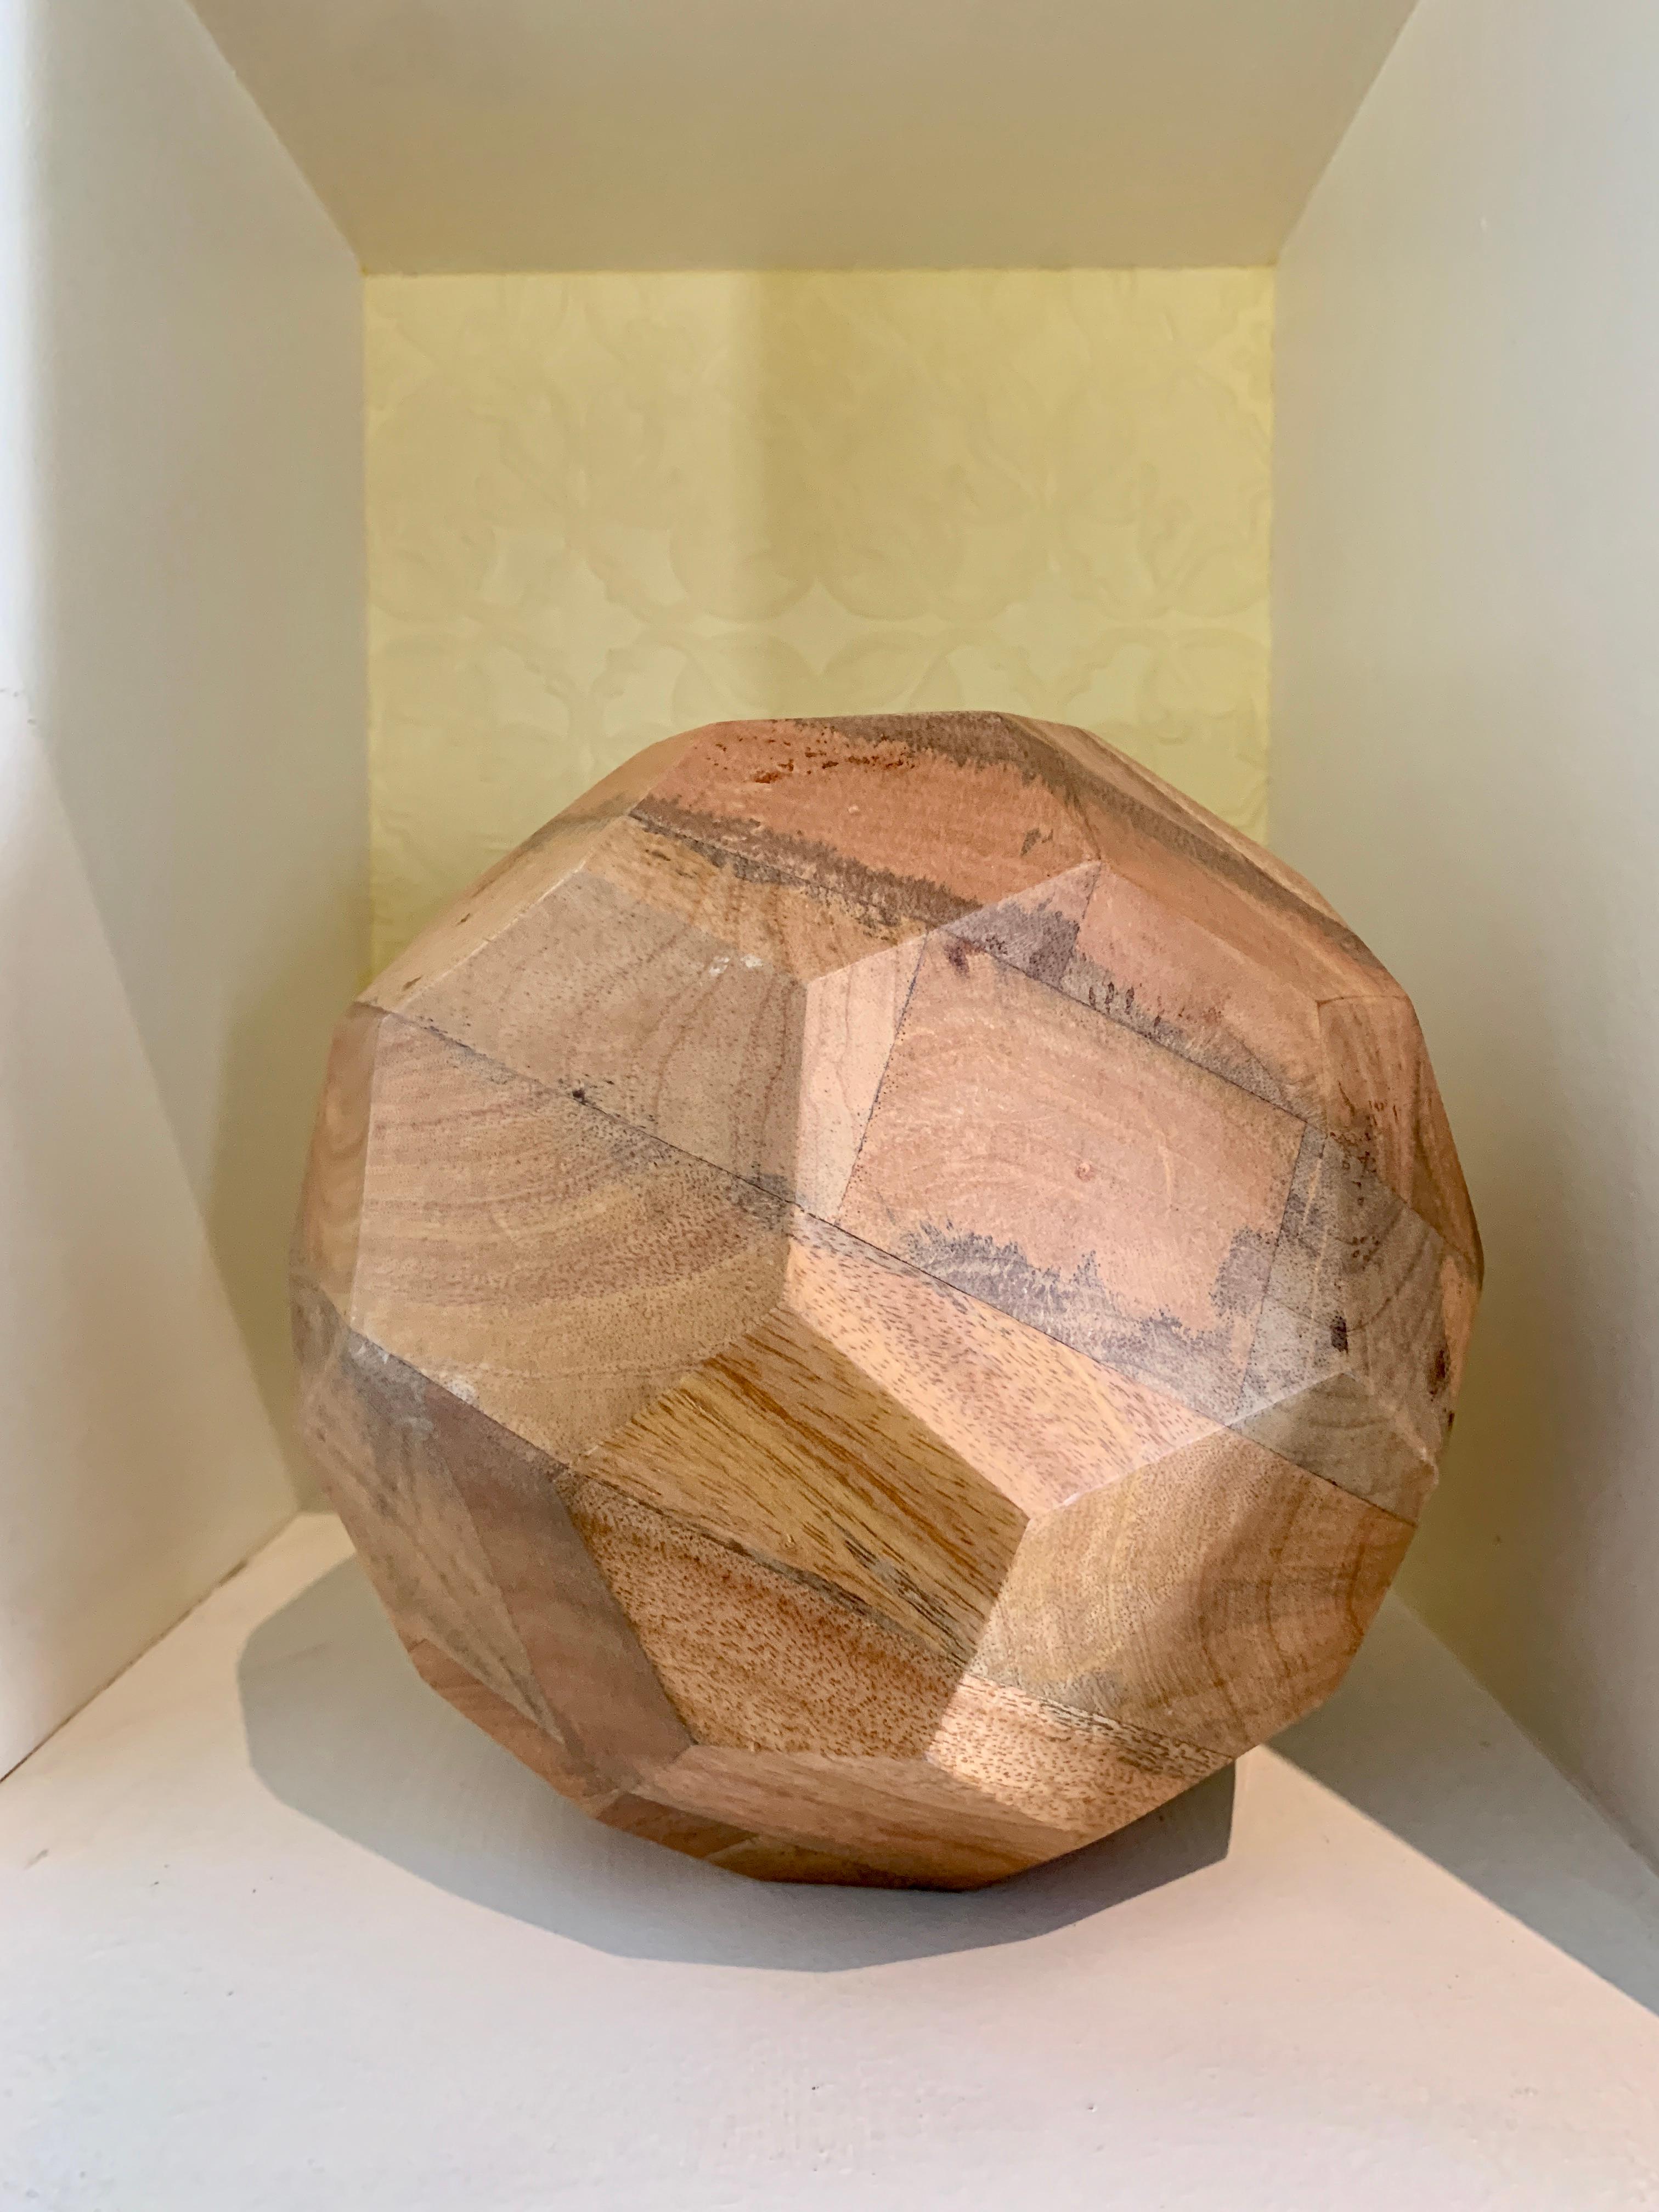 Organic sculpted handcut wooden sphere, a great decorative addition to any shelf or table, a compliment as a bookend or light enough to be a substantial paper weight. Solid wood and finely cut with just enough patina to give your space character.